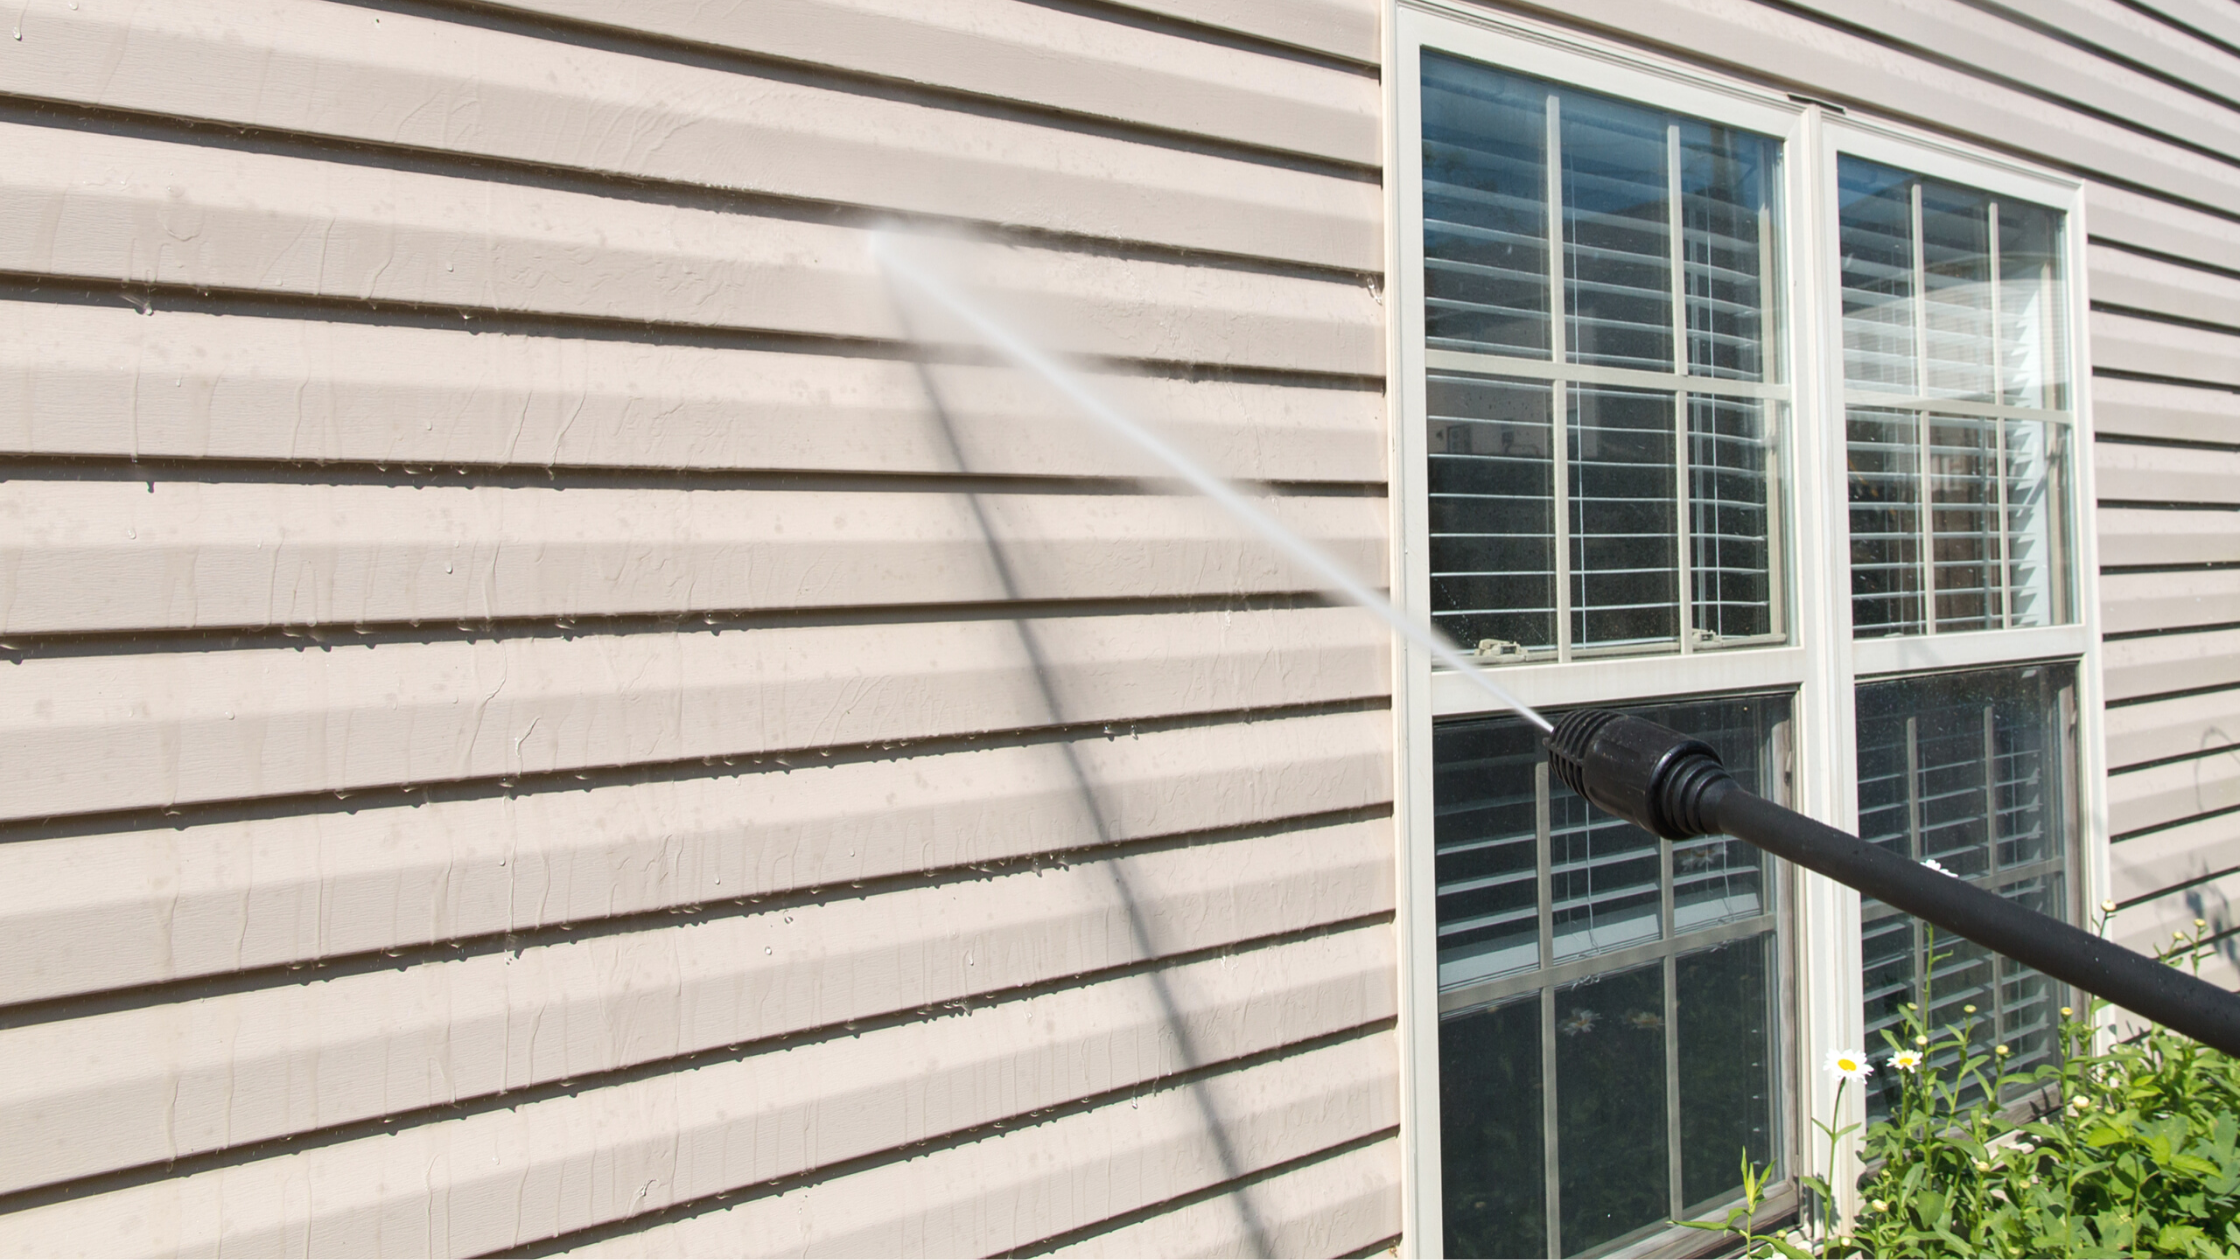 Soft washing and power washing your home exterior siding in the Twin Cities